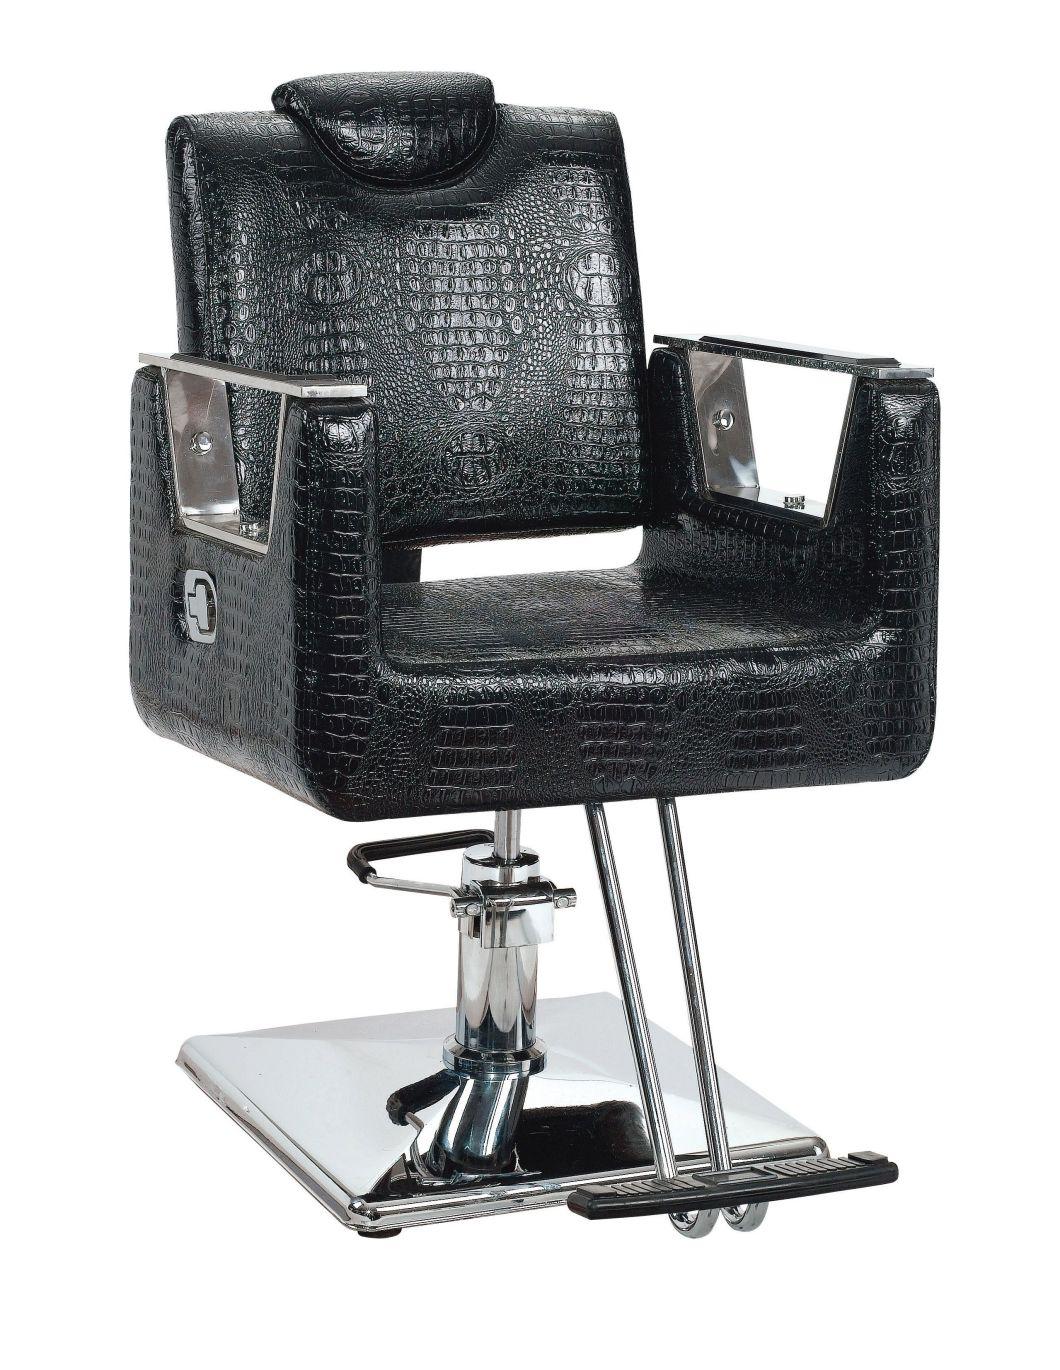 Hl- 990 Make up Chair for Man or Woman with Stainless Steel Armrest and Aluminum Pedal